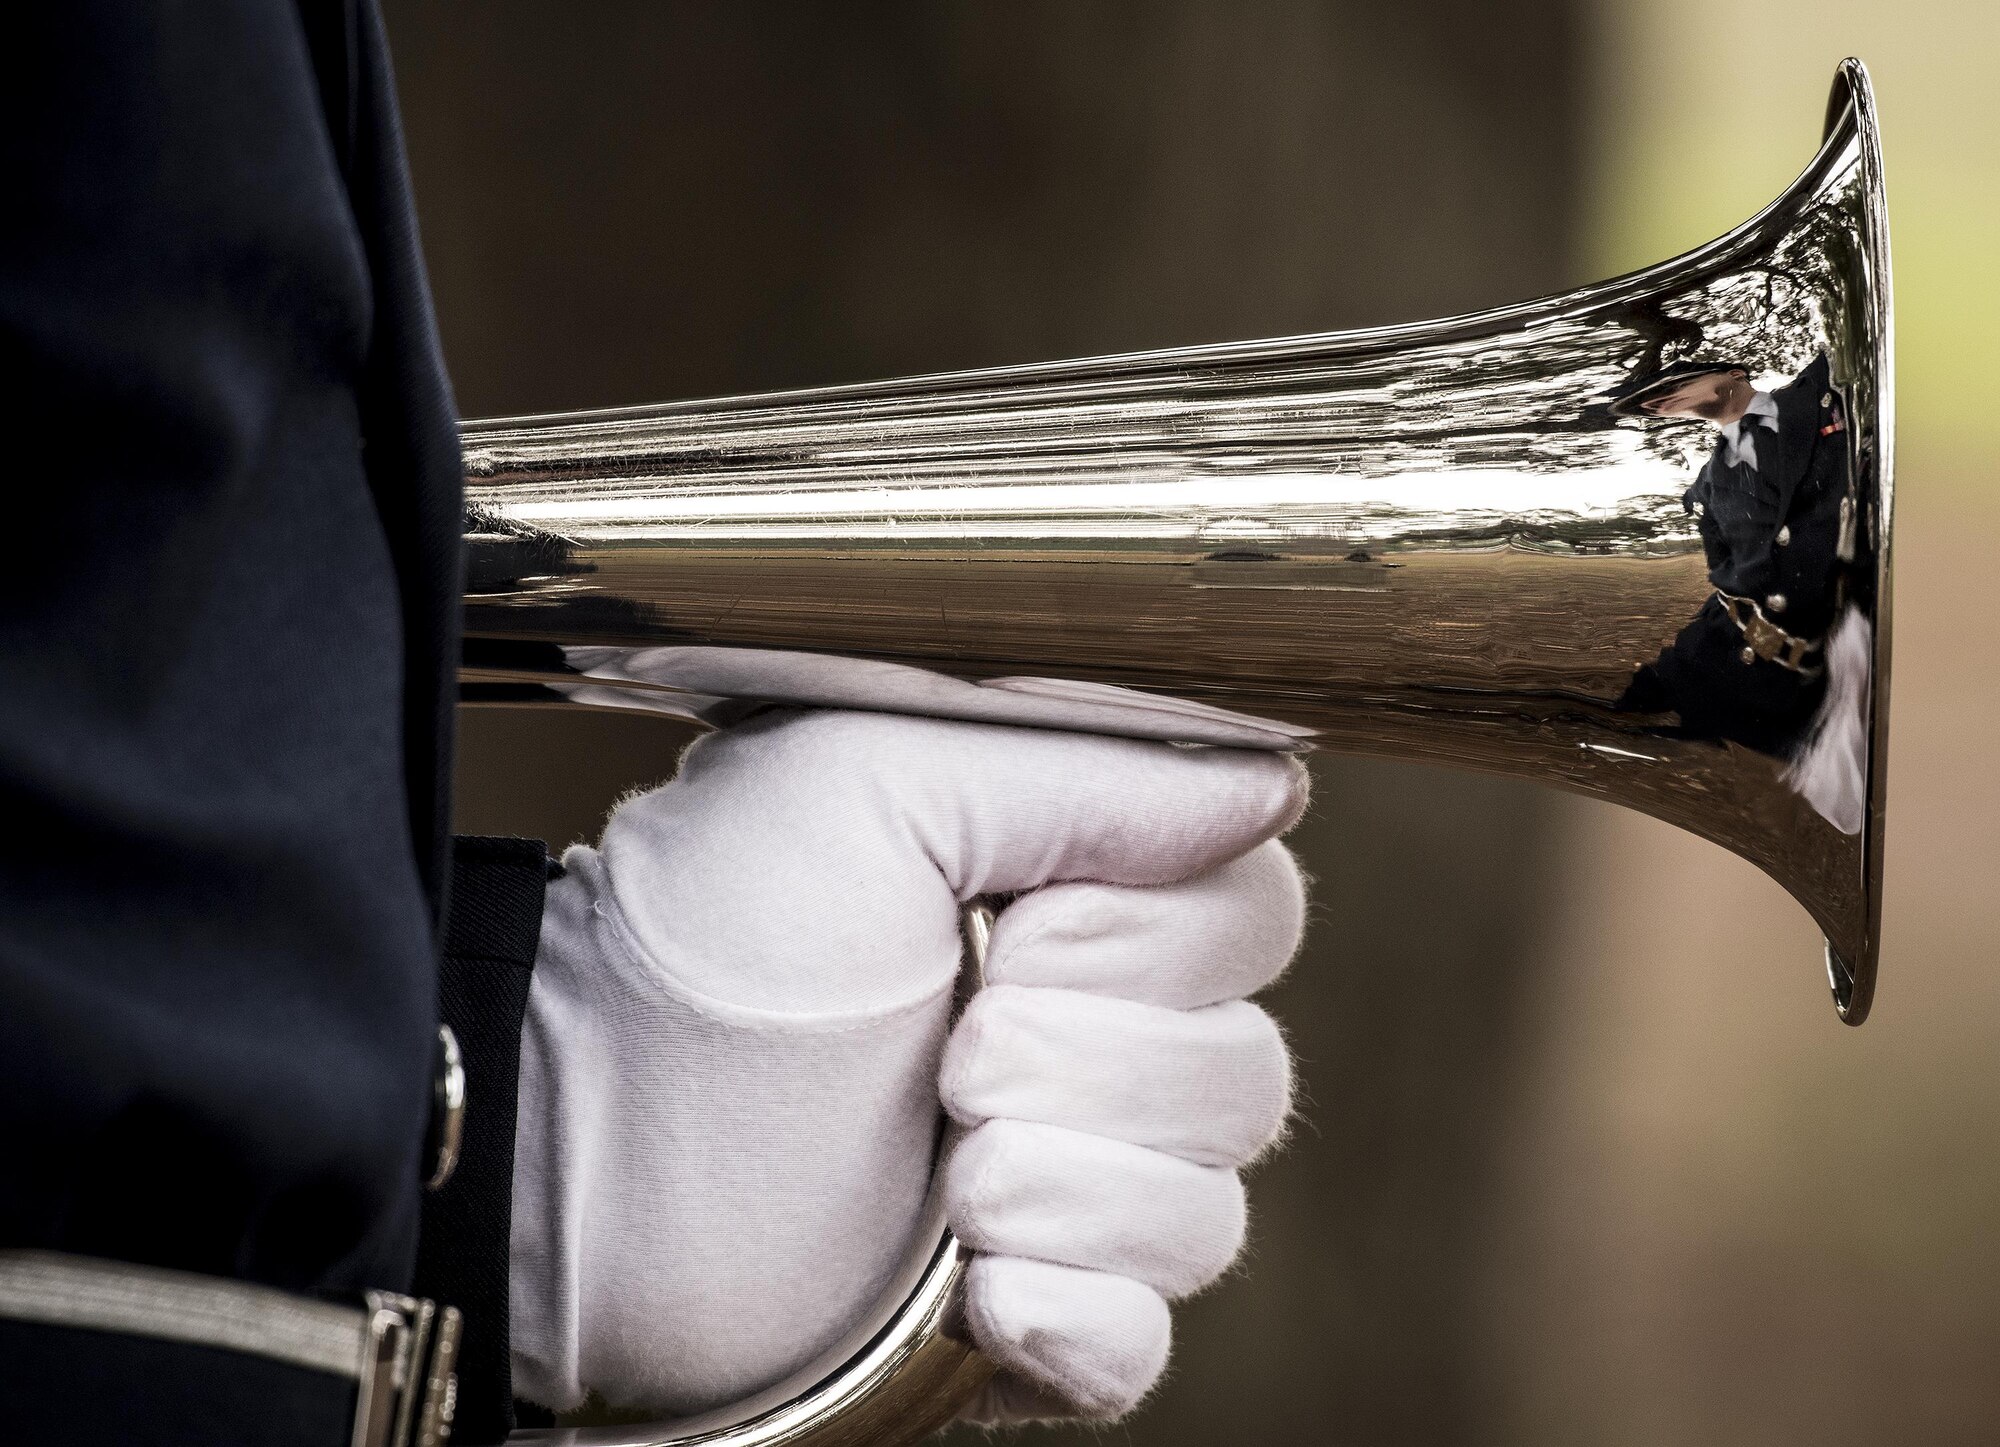 A new Honor Guard Airman grips the bugle prior to unit’s graduation ceremony at Eglin Air Force Base, Fla., March 1.  Approximately 12 new Airmen graduated from the 120-plus-hour course. The graduation performance includes flag detail, rifle volley, pall bearers and bugler for friends, family and unit commanders. (U.S. Air Force photo/Samuel King Jr.)